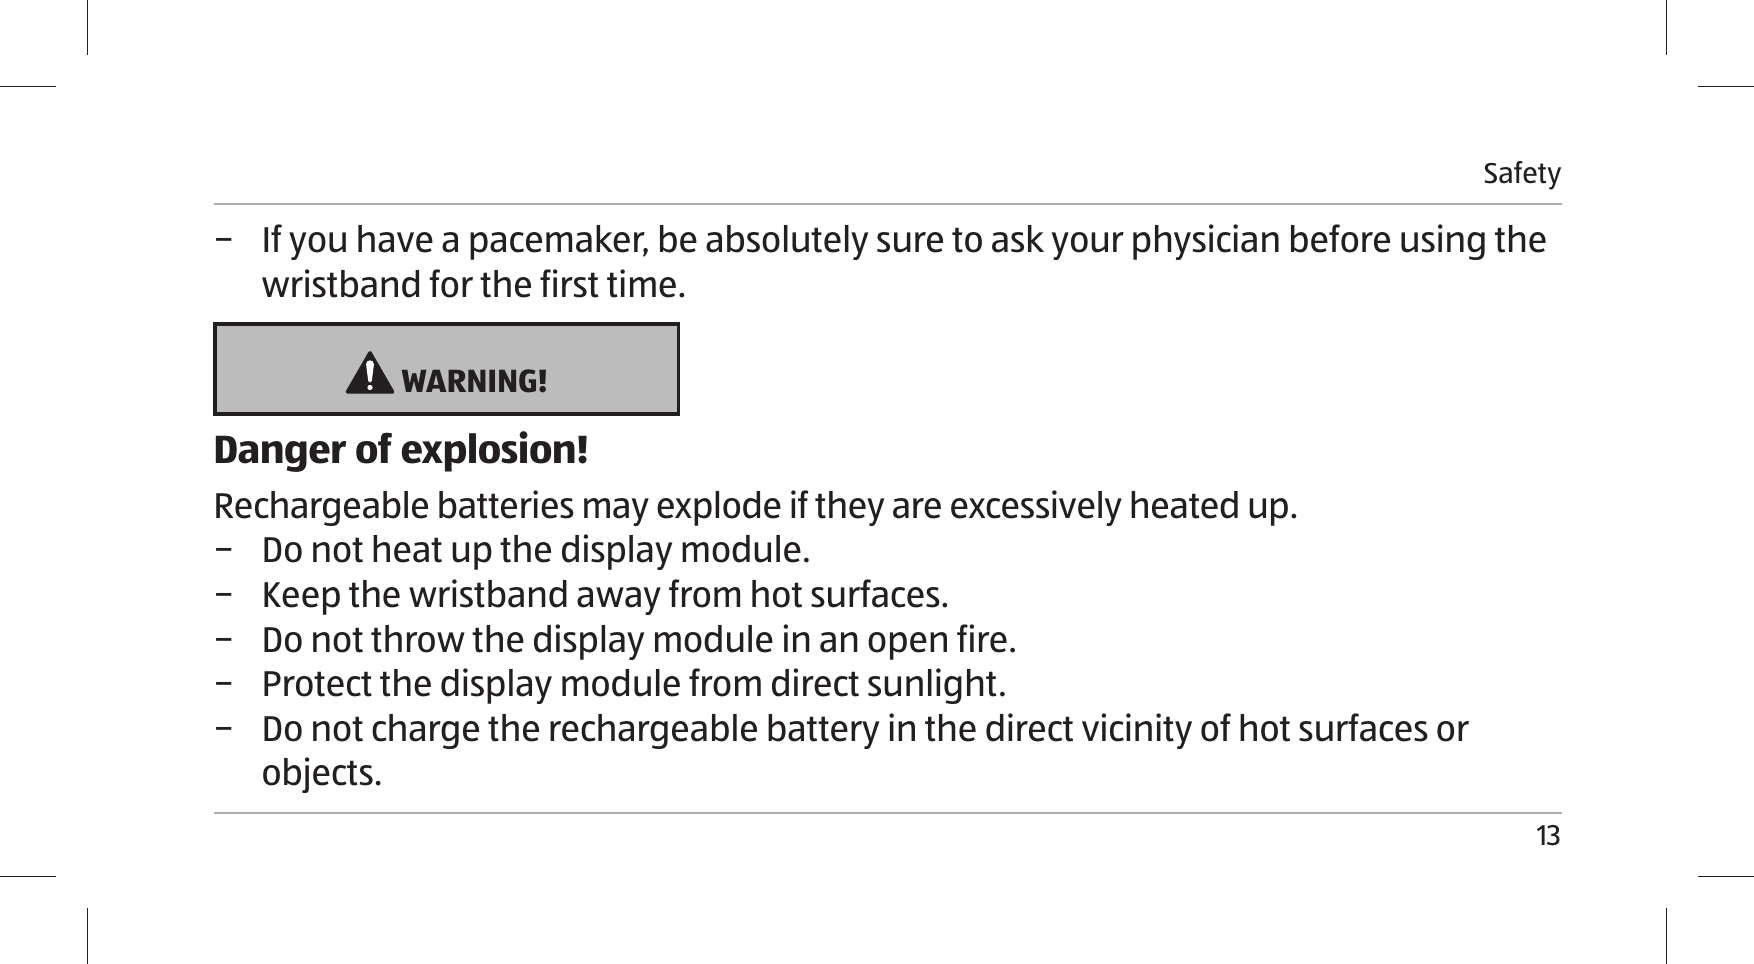 Safety13 − If you have a pacemaker, be absolutely sure to ask your physician before using the wristband for the first time.  WARNING!Danger of explosion!Rechargeable batteries may explode if they are excessively heated up. − Do not heat up the display module.  − Keep the wristband away from hot surfaces.  − Do not throw the display module in an open fire.  − Protect the display module from direct sunlight.  − Do not charge the rechargeable battery in the direct vicinity of hot surfaces or objects.